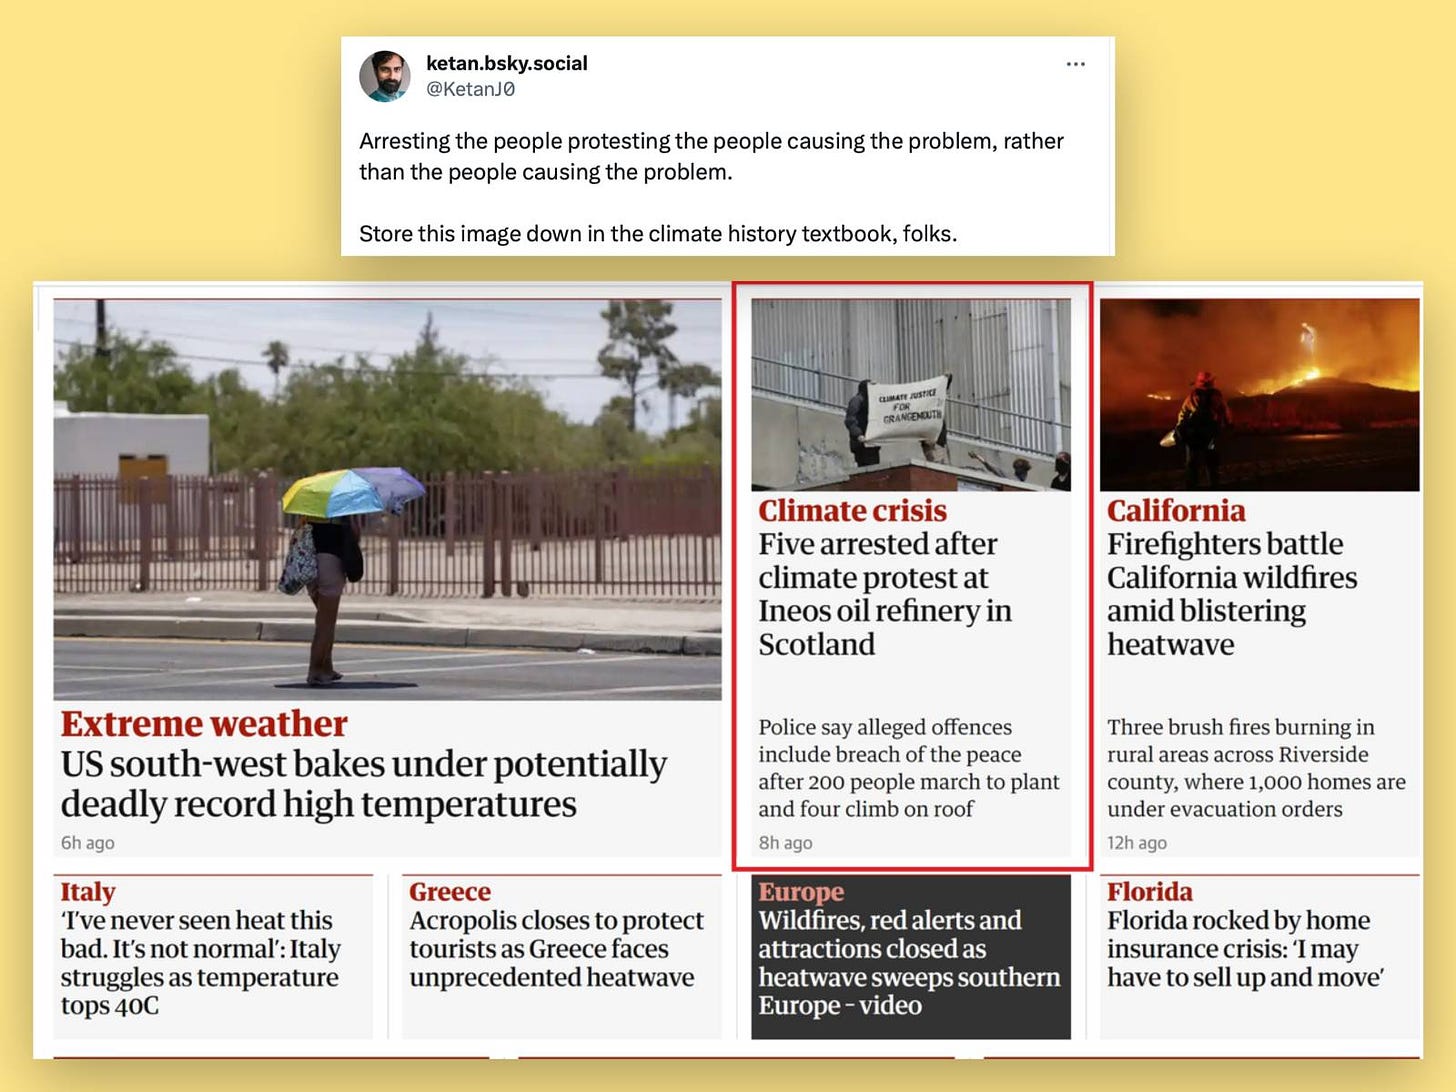 A tweet from Ketan Joshi shows the front page of the Guardian, which has news of climate disasters and climate protesters getting arrested. The tweet reads, “Arresting the people protesting the people causing the problem, rather than the people causing the problem. Store this image down in the climate history textbook, folks.”